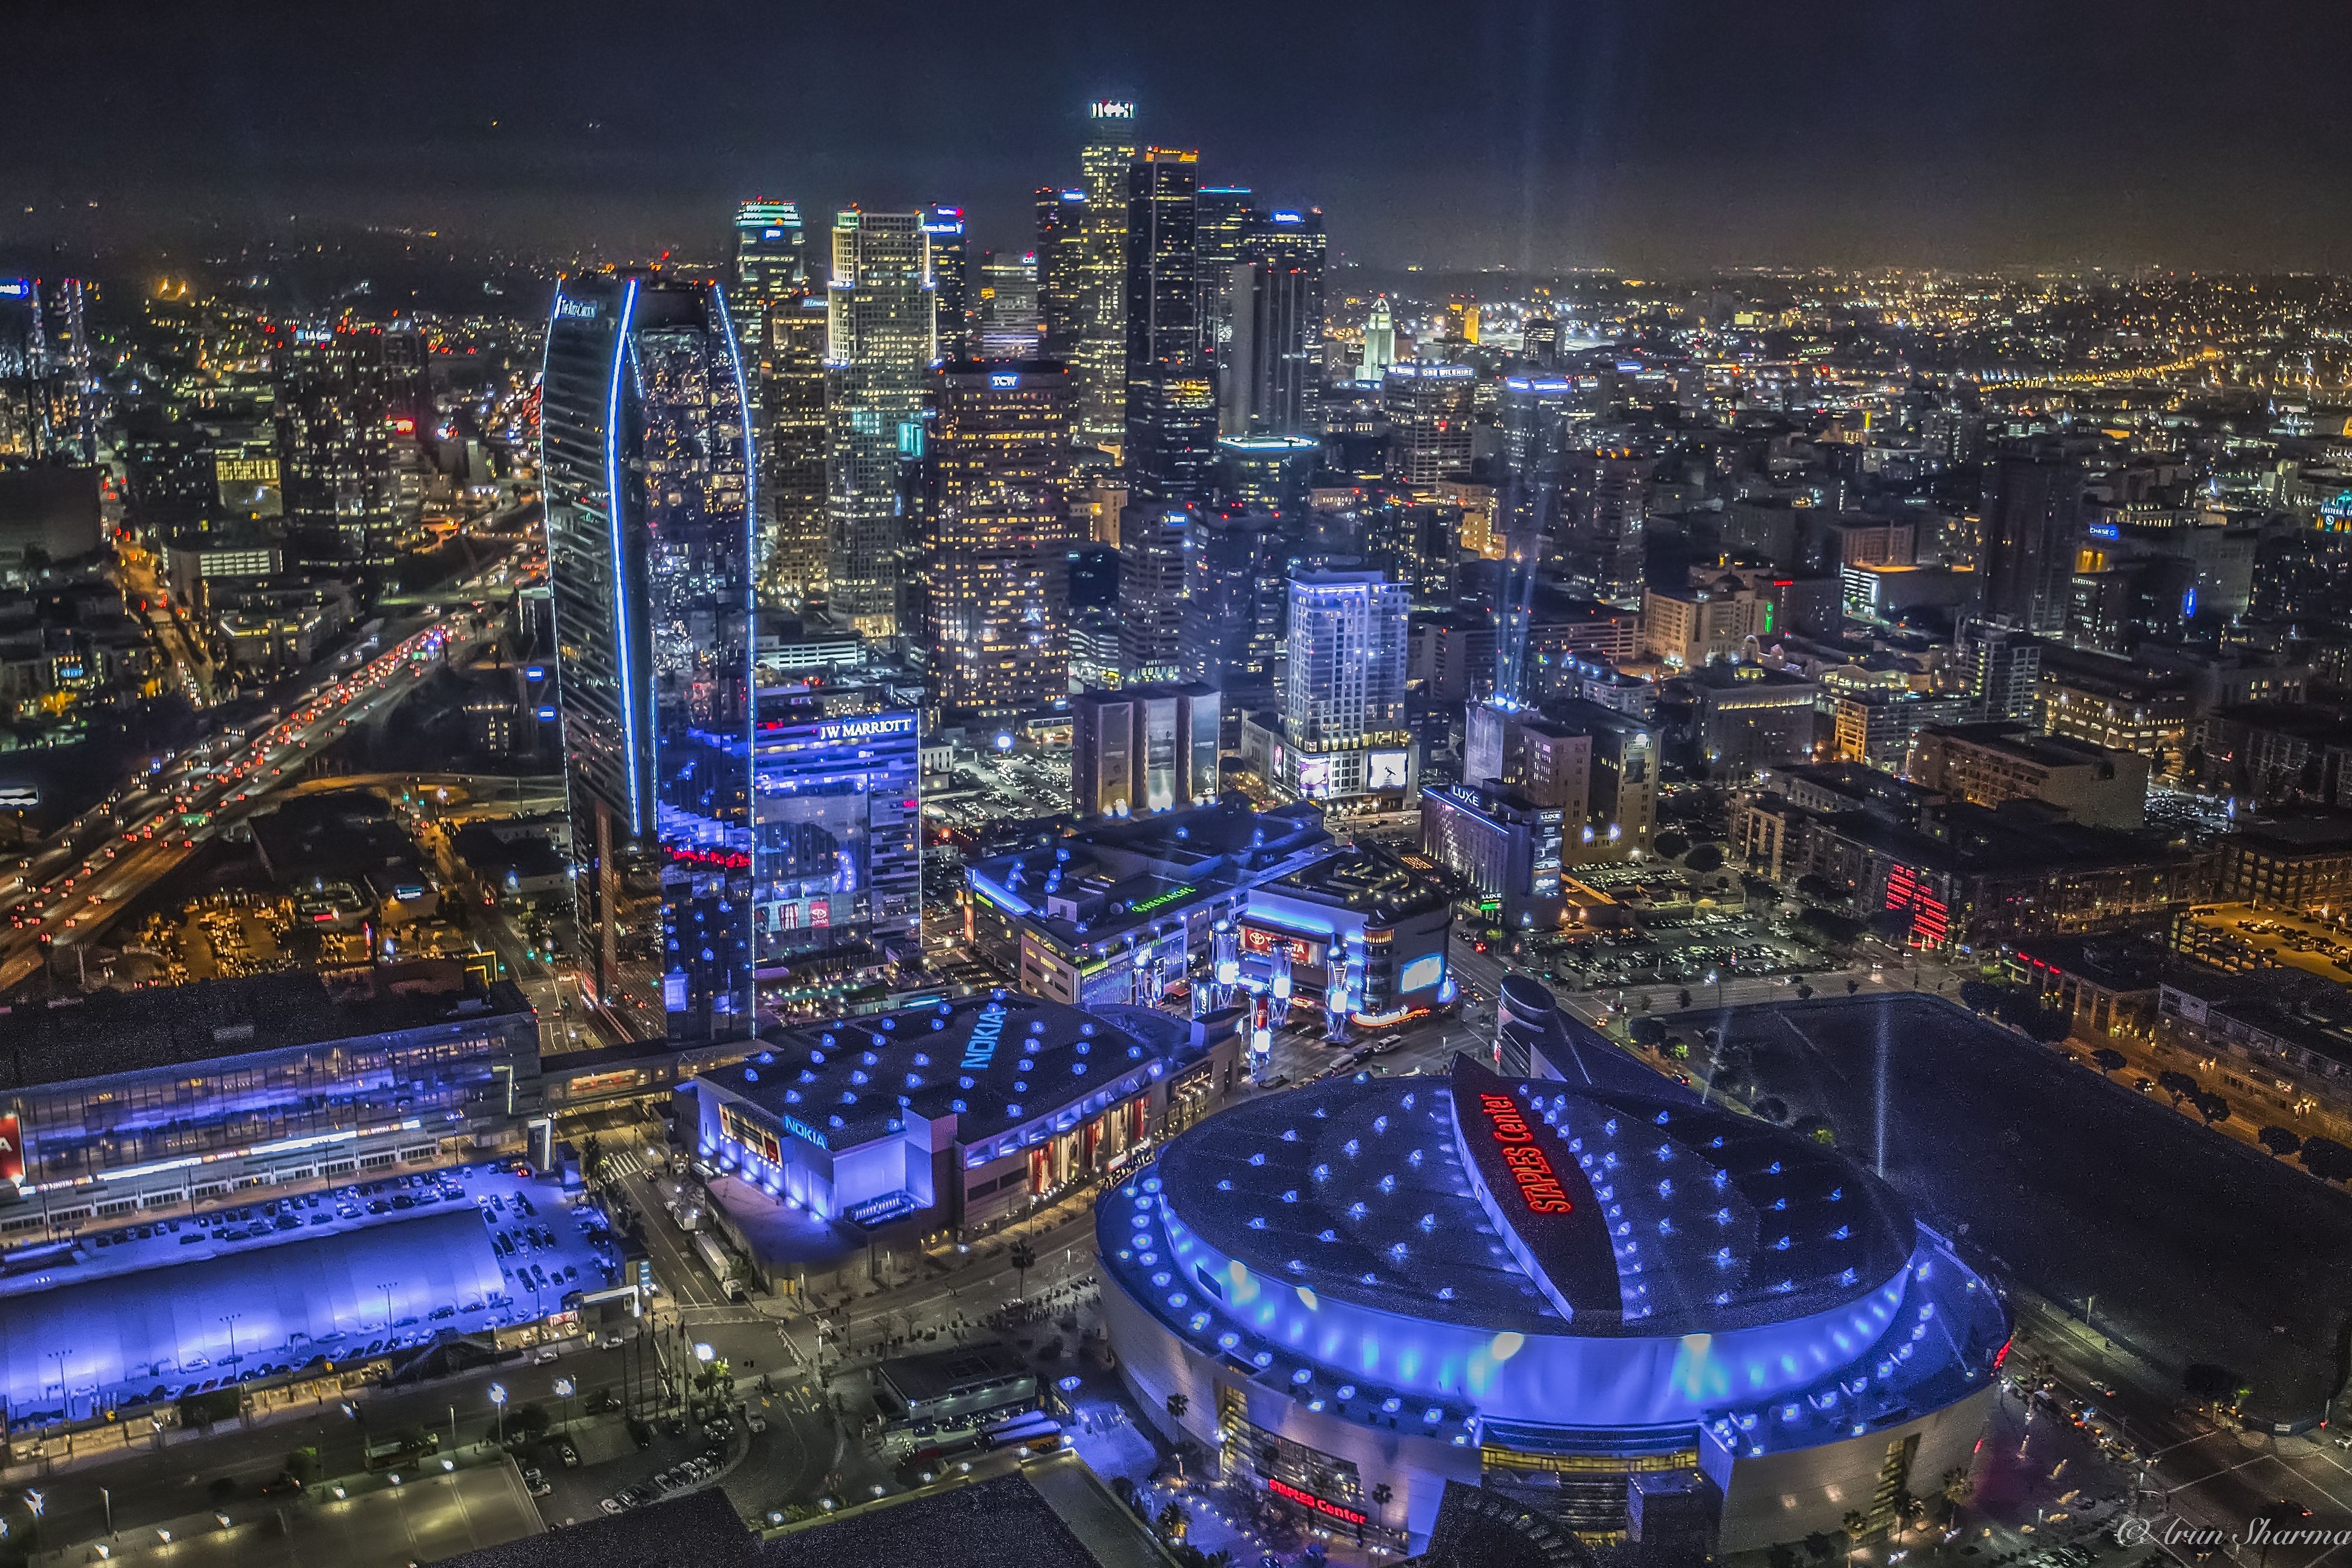 staples center tickets. Los angeles, City, Helicopter tour